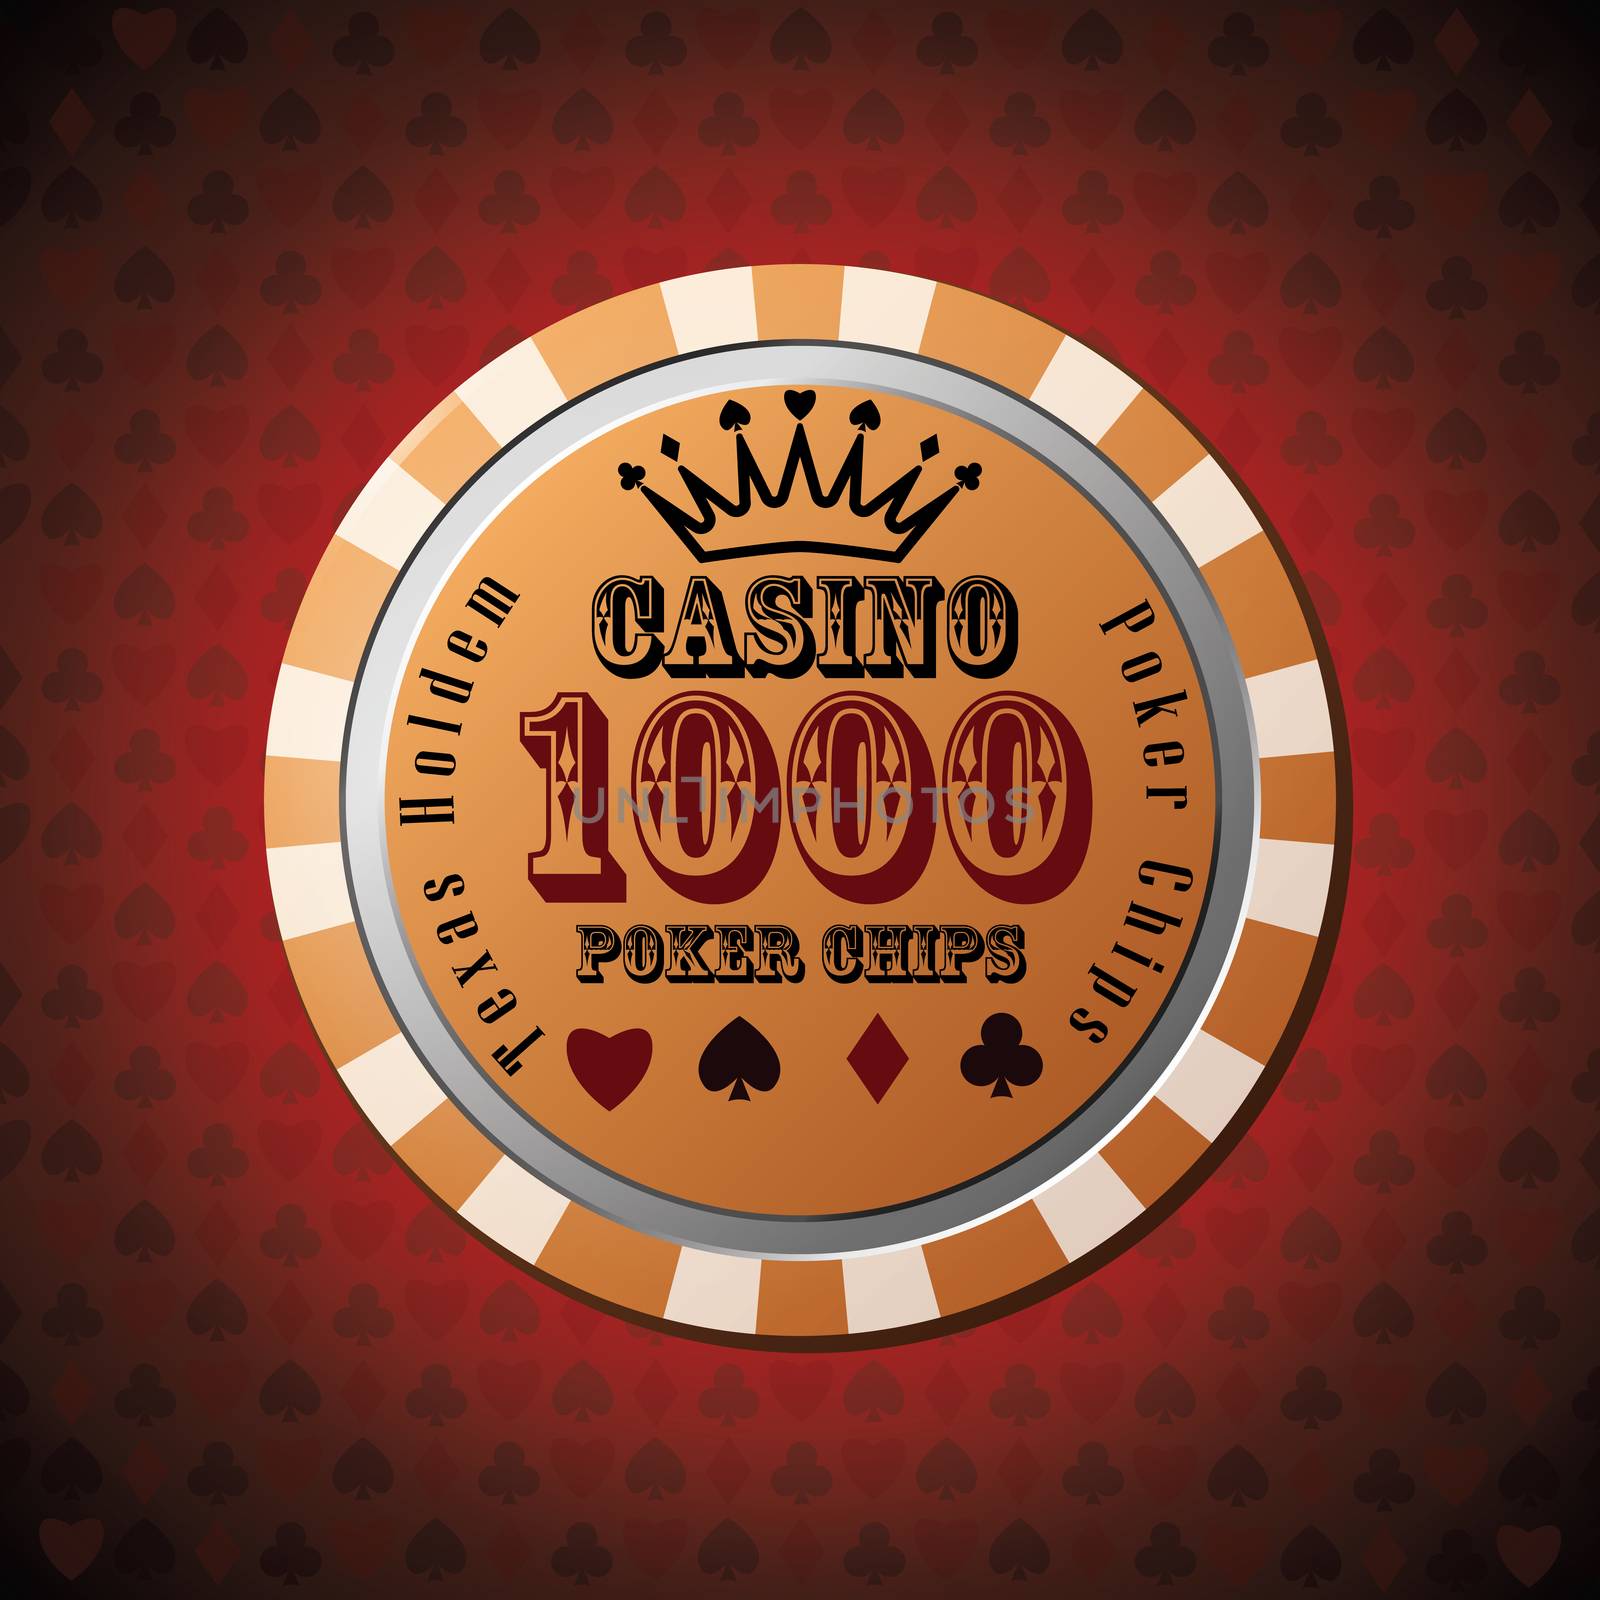 Poker chip 1000 on red background